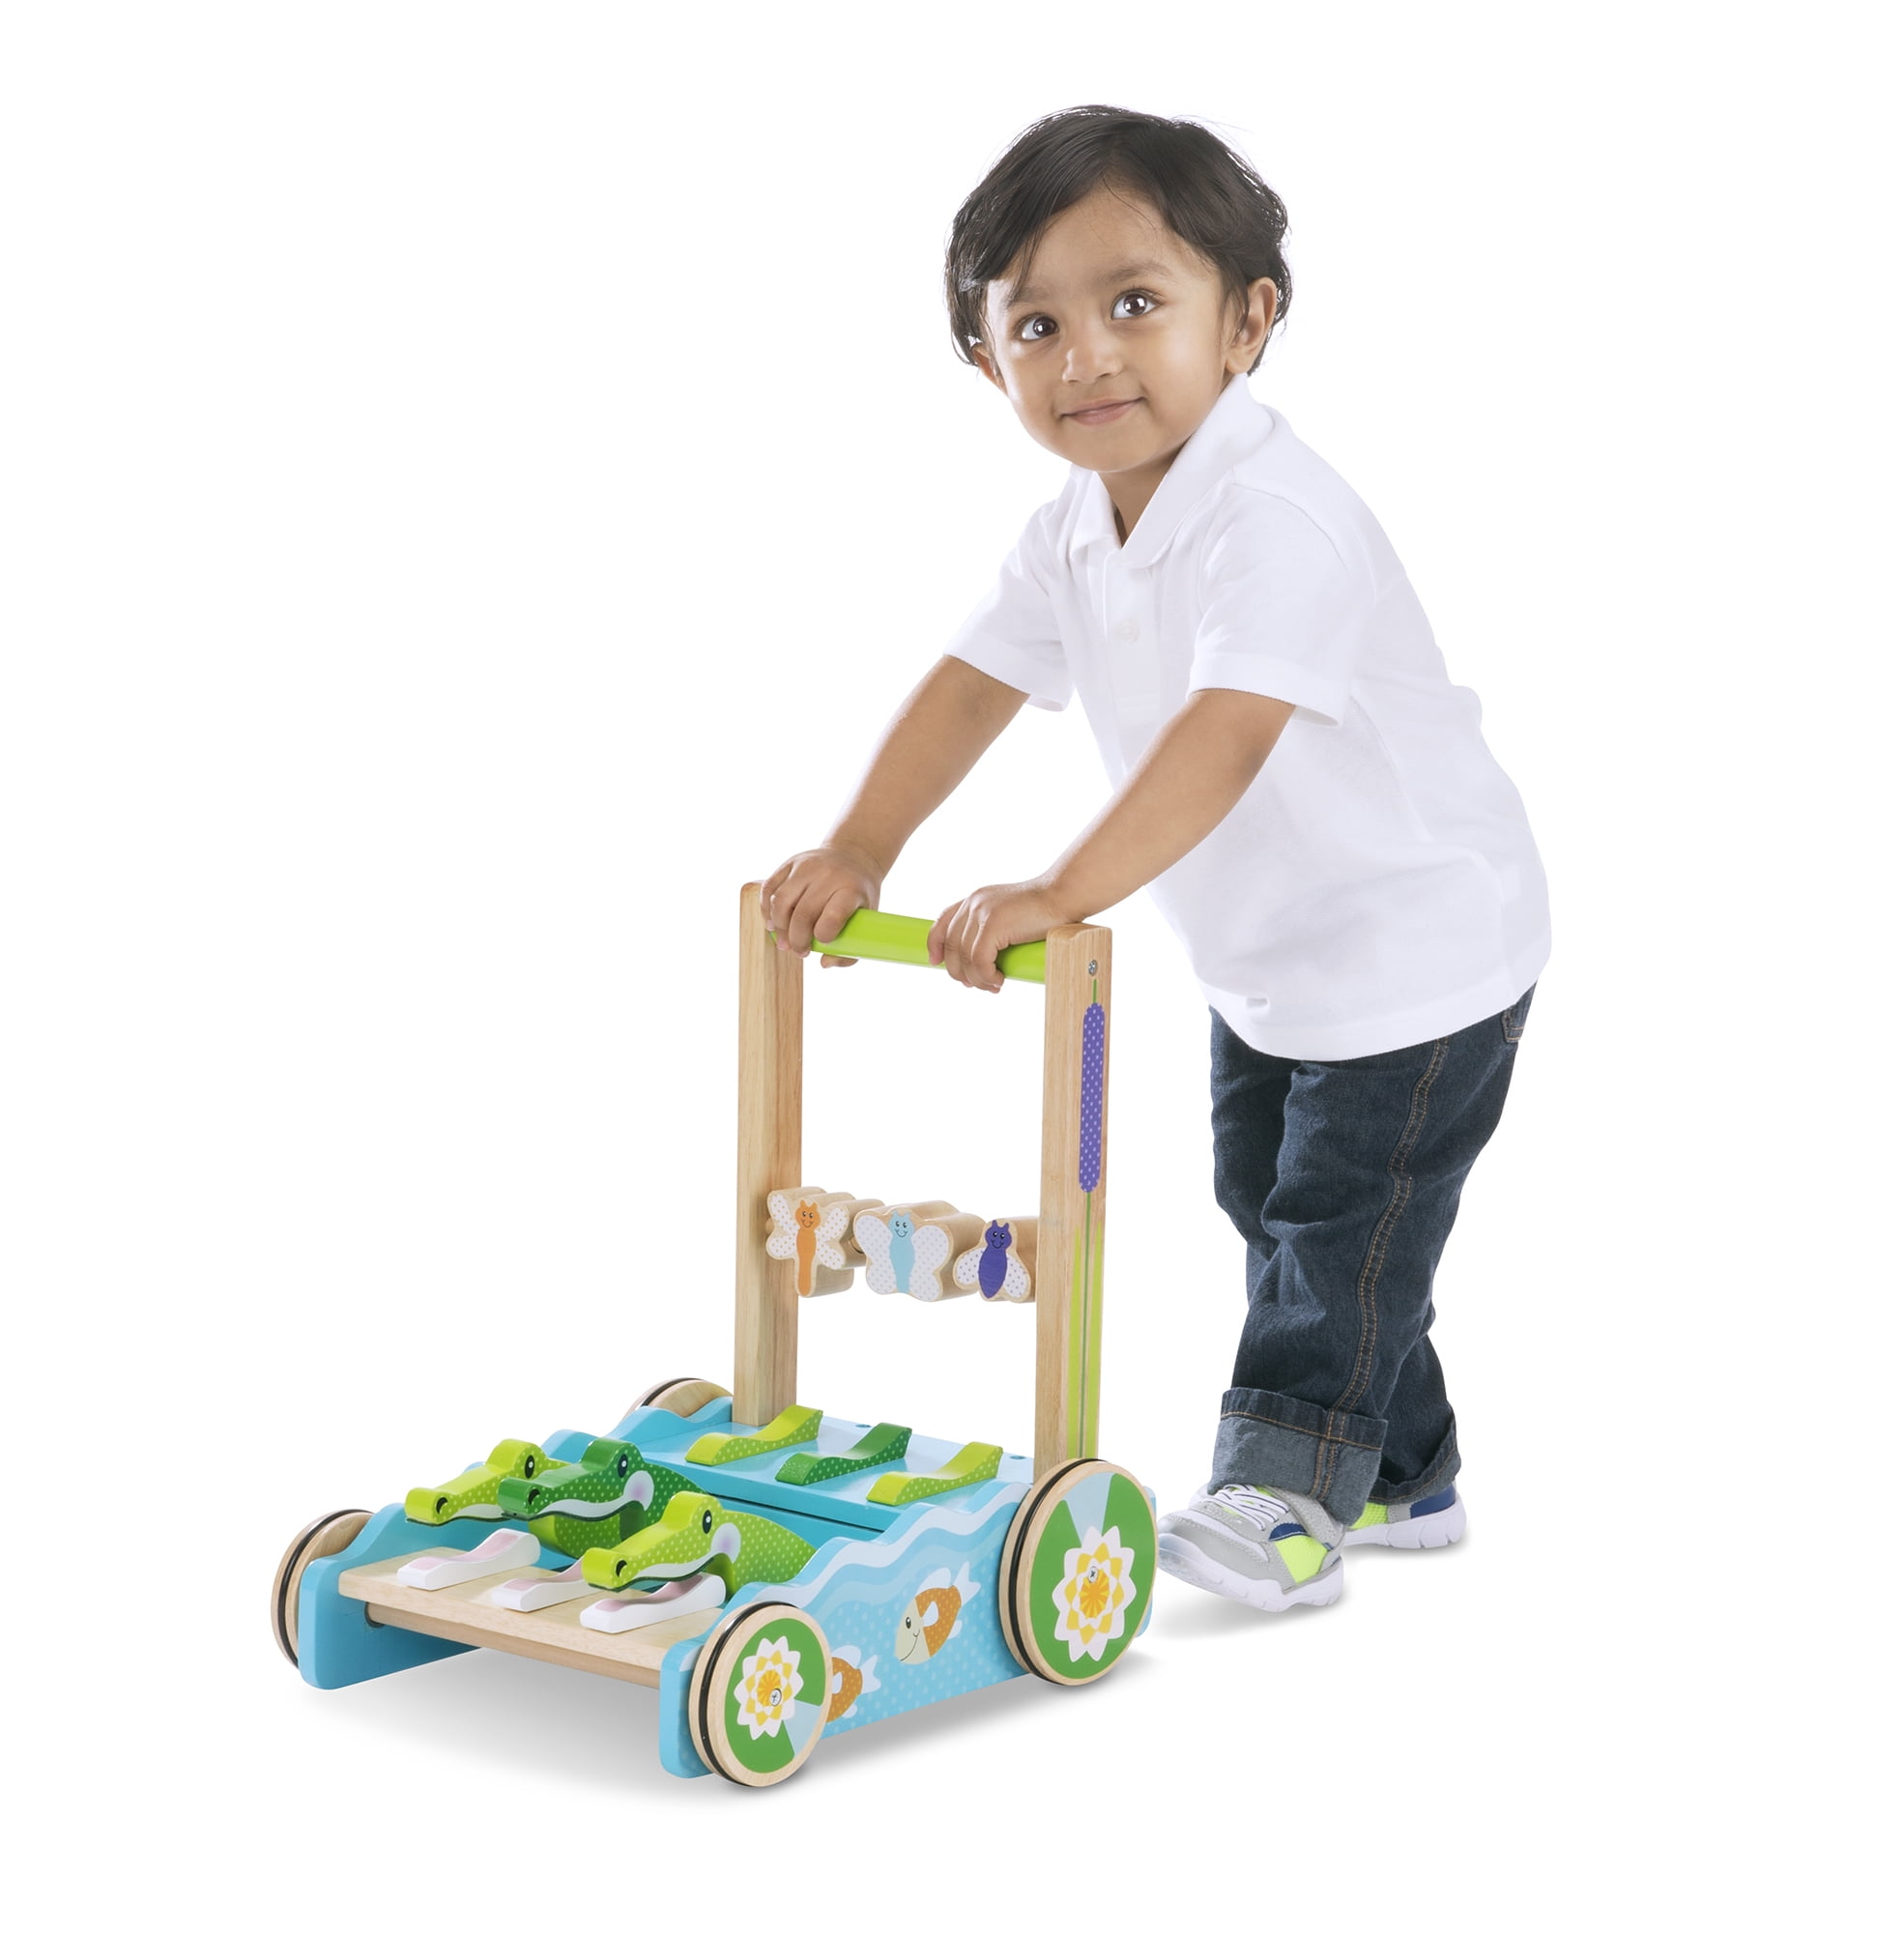 melissa & doug deluxe chomp and clack alligator wooden push toy and activity walker